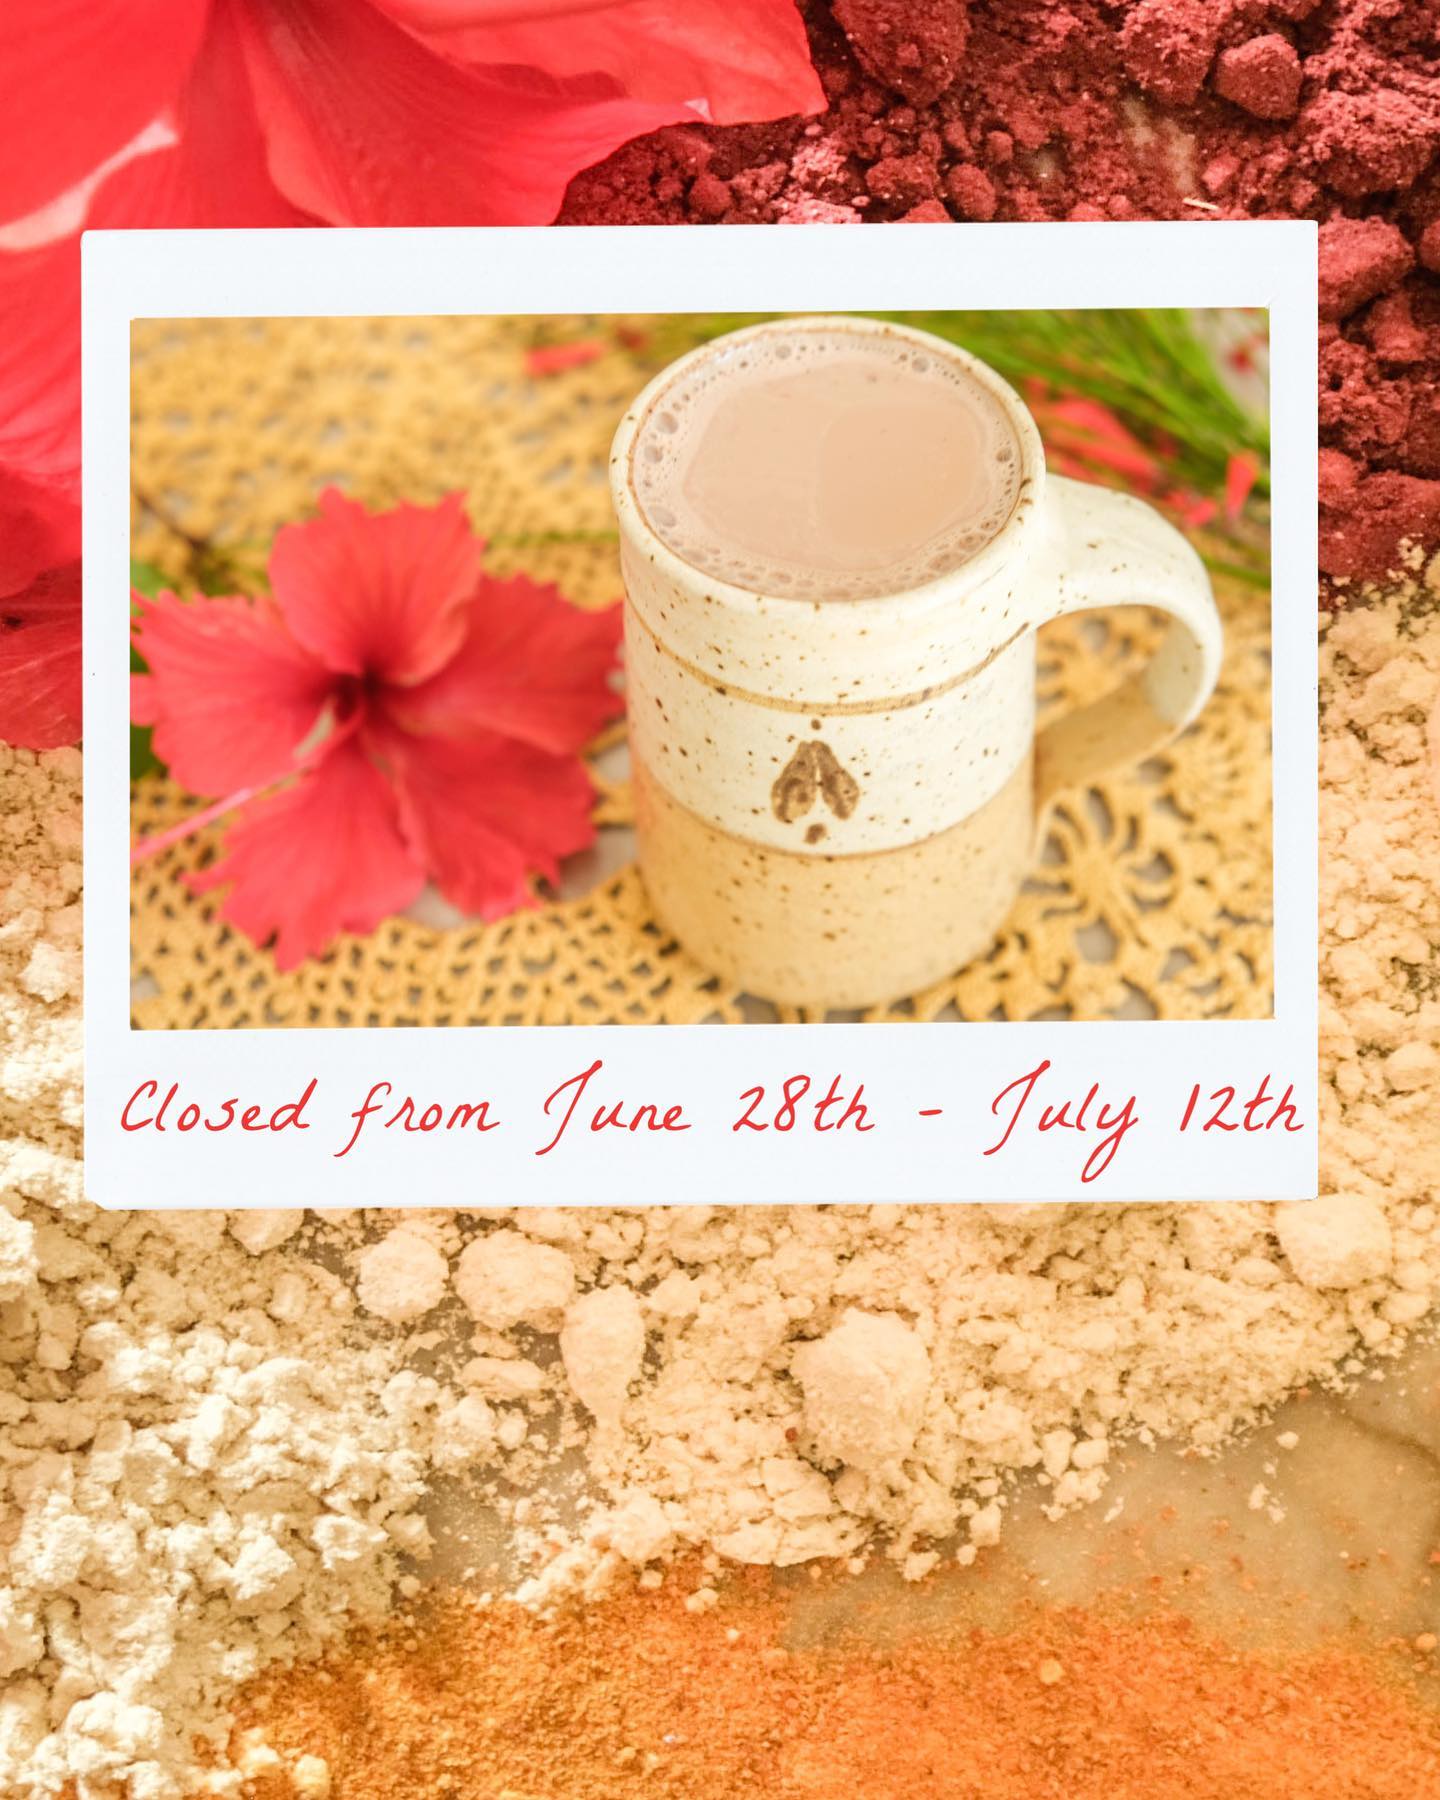 Aloha dearest, I will be closed from the 28th of June until the 12th of July for a well deserved vacation. So pass by to stock up on your immune boosting, flu fighting, detox herbs. Your natural soaps, shampoo, fluoride free tooth paste, sage ( I just received a ton of varied sage, smudging tools and incense).  I also have a 2 for 1 special on gluten-free cookies until Monday.  So my schedule will be: Thursday 23rd of June: 11-4 pm
Friday 24 June: 2-4 pm
Saturday 25 June: 11- 4 pm
Monday 27 June: 11-4 pm
Closed 28 June till 12th July. I will open back on the 13th of July for Herbalista’s 3rd anniversary! Will send you the invitation to that celebration soon. Thank you for being part of this collective journey, Happy summer solstice, Love you to the wild moon and back.